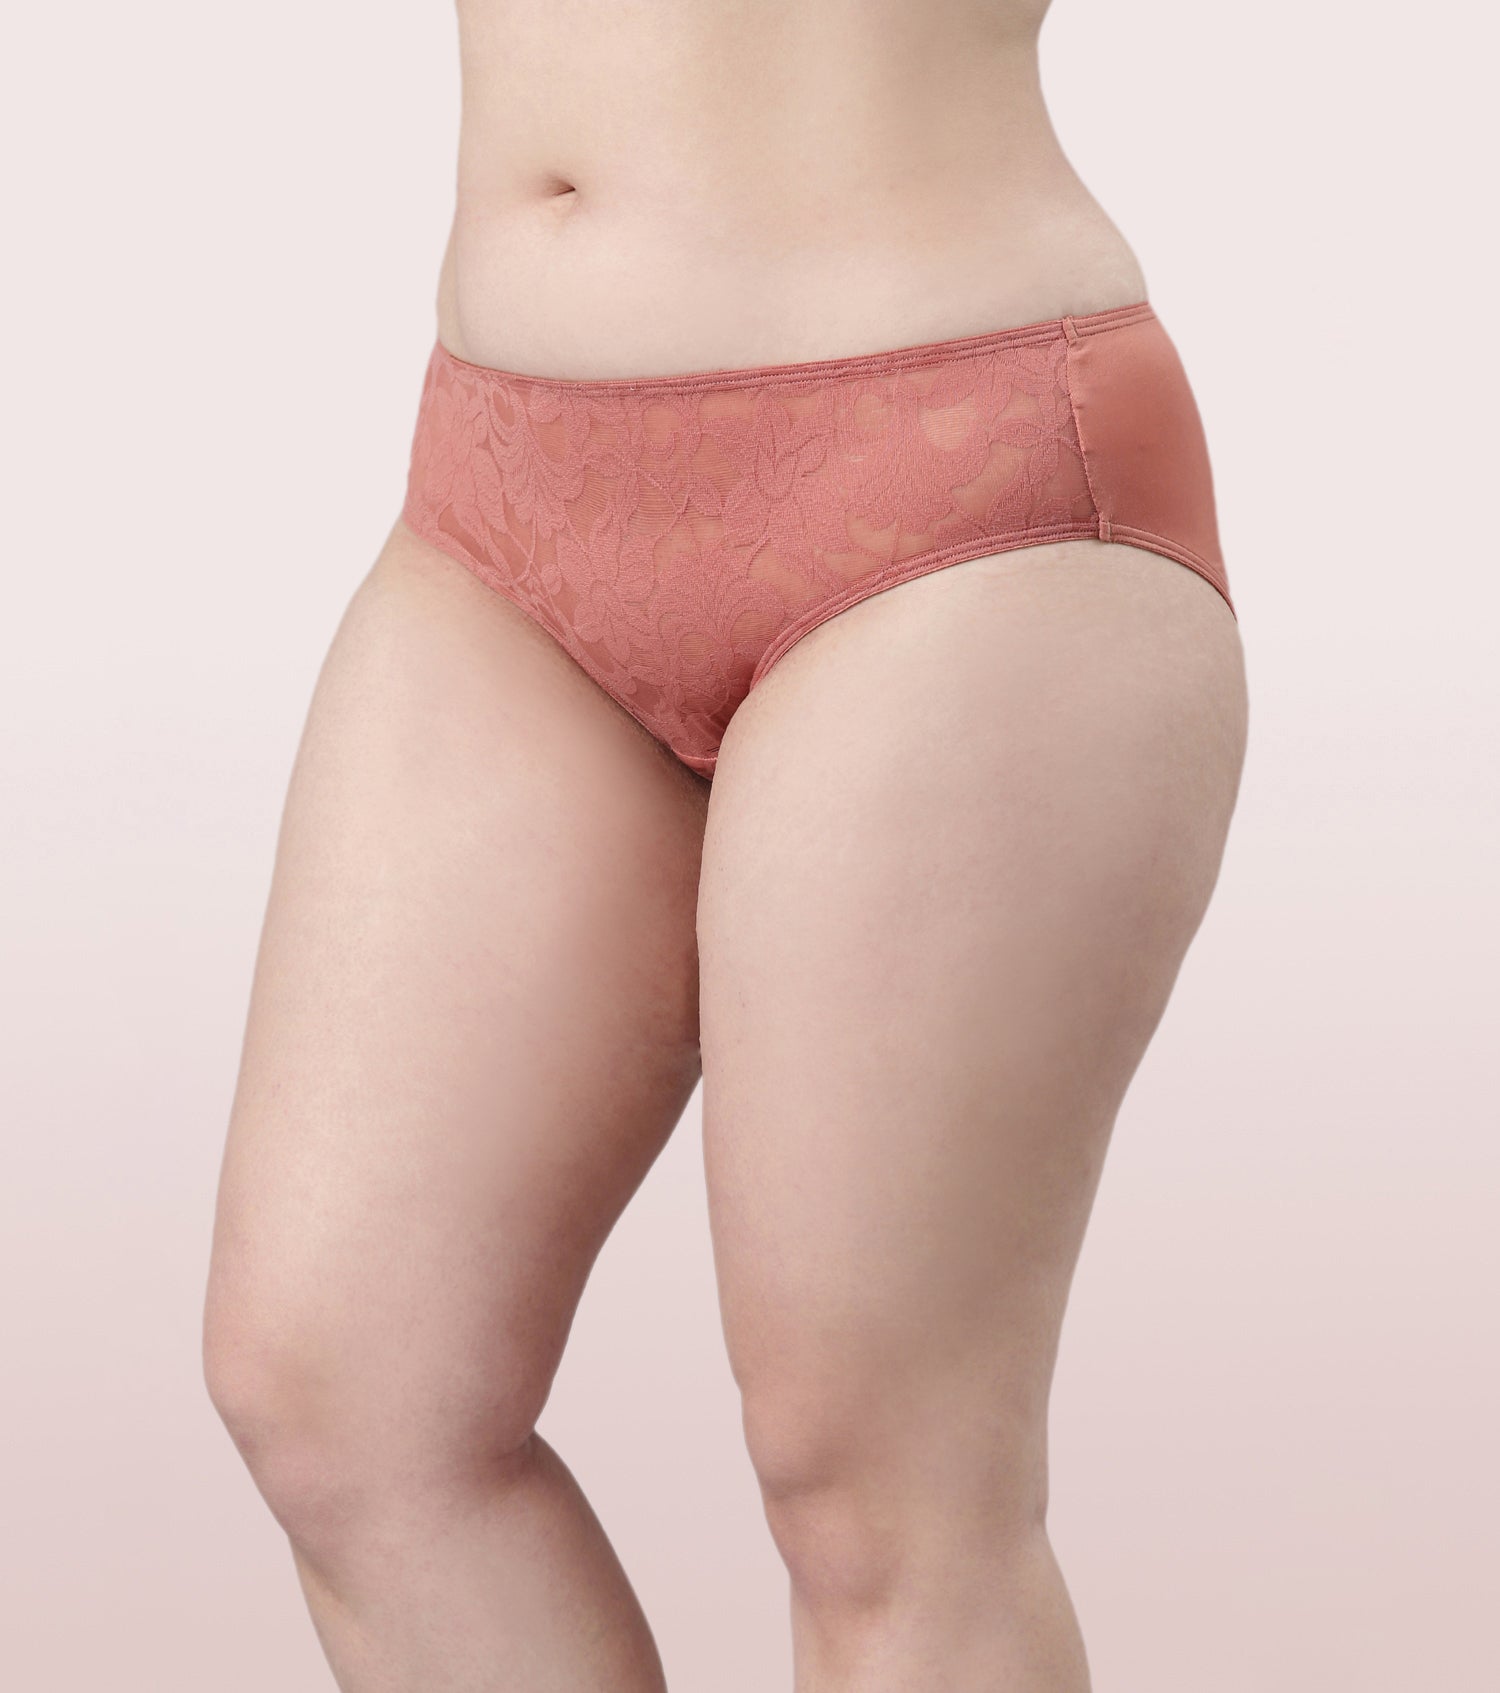 Enamor Mid Waist Hipster Co-Ordinate Panty For Women | Soft Tulle Fabric With Floral Lace At The Front | P122